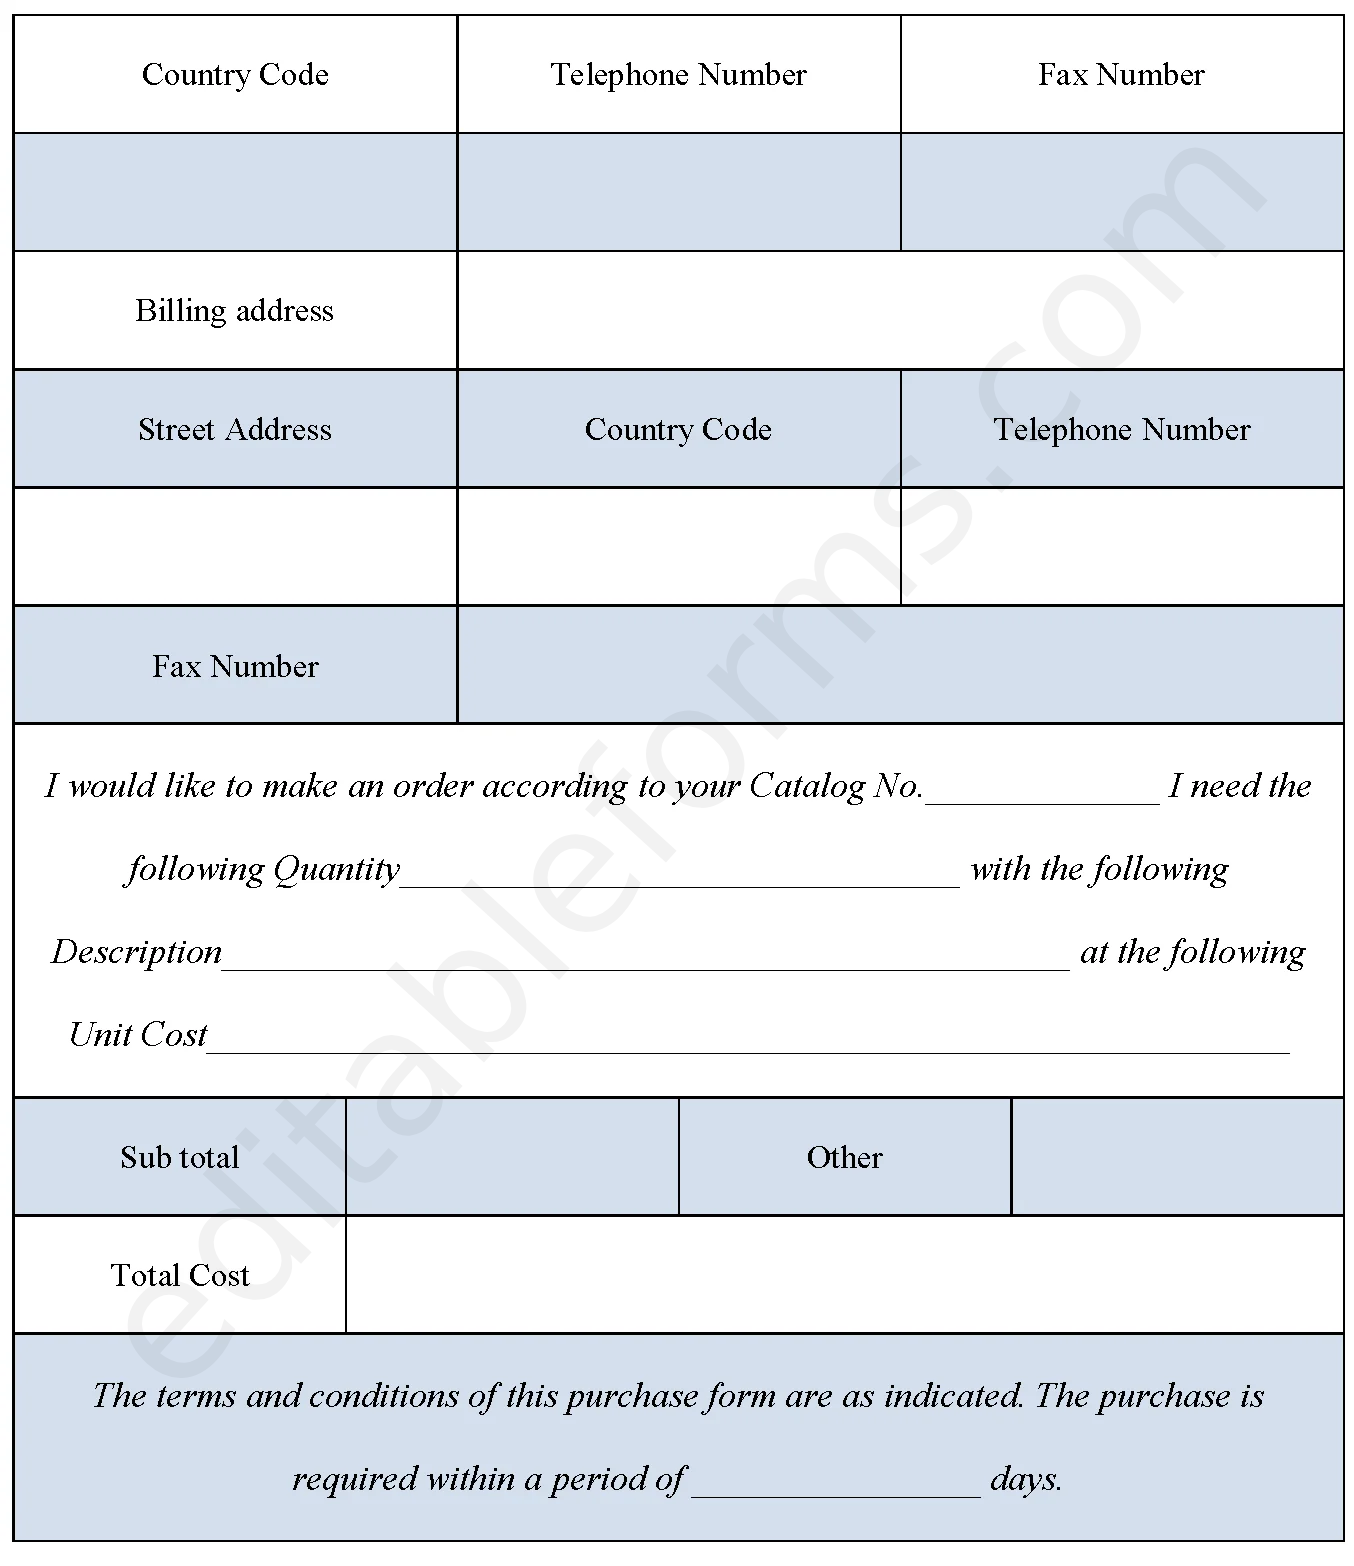 Sample Purchase Fillable PDF Template